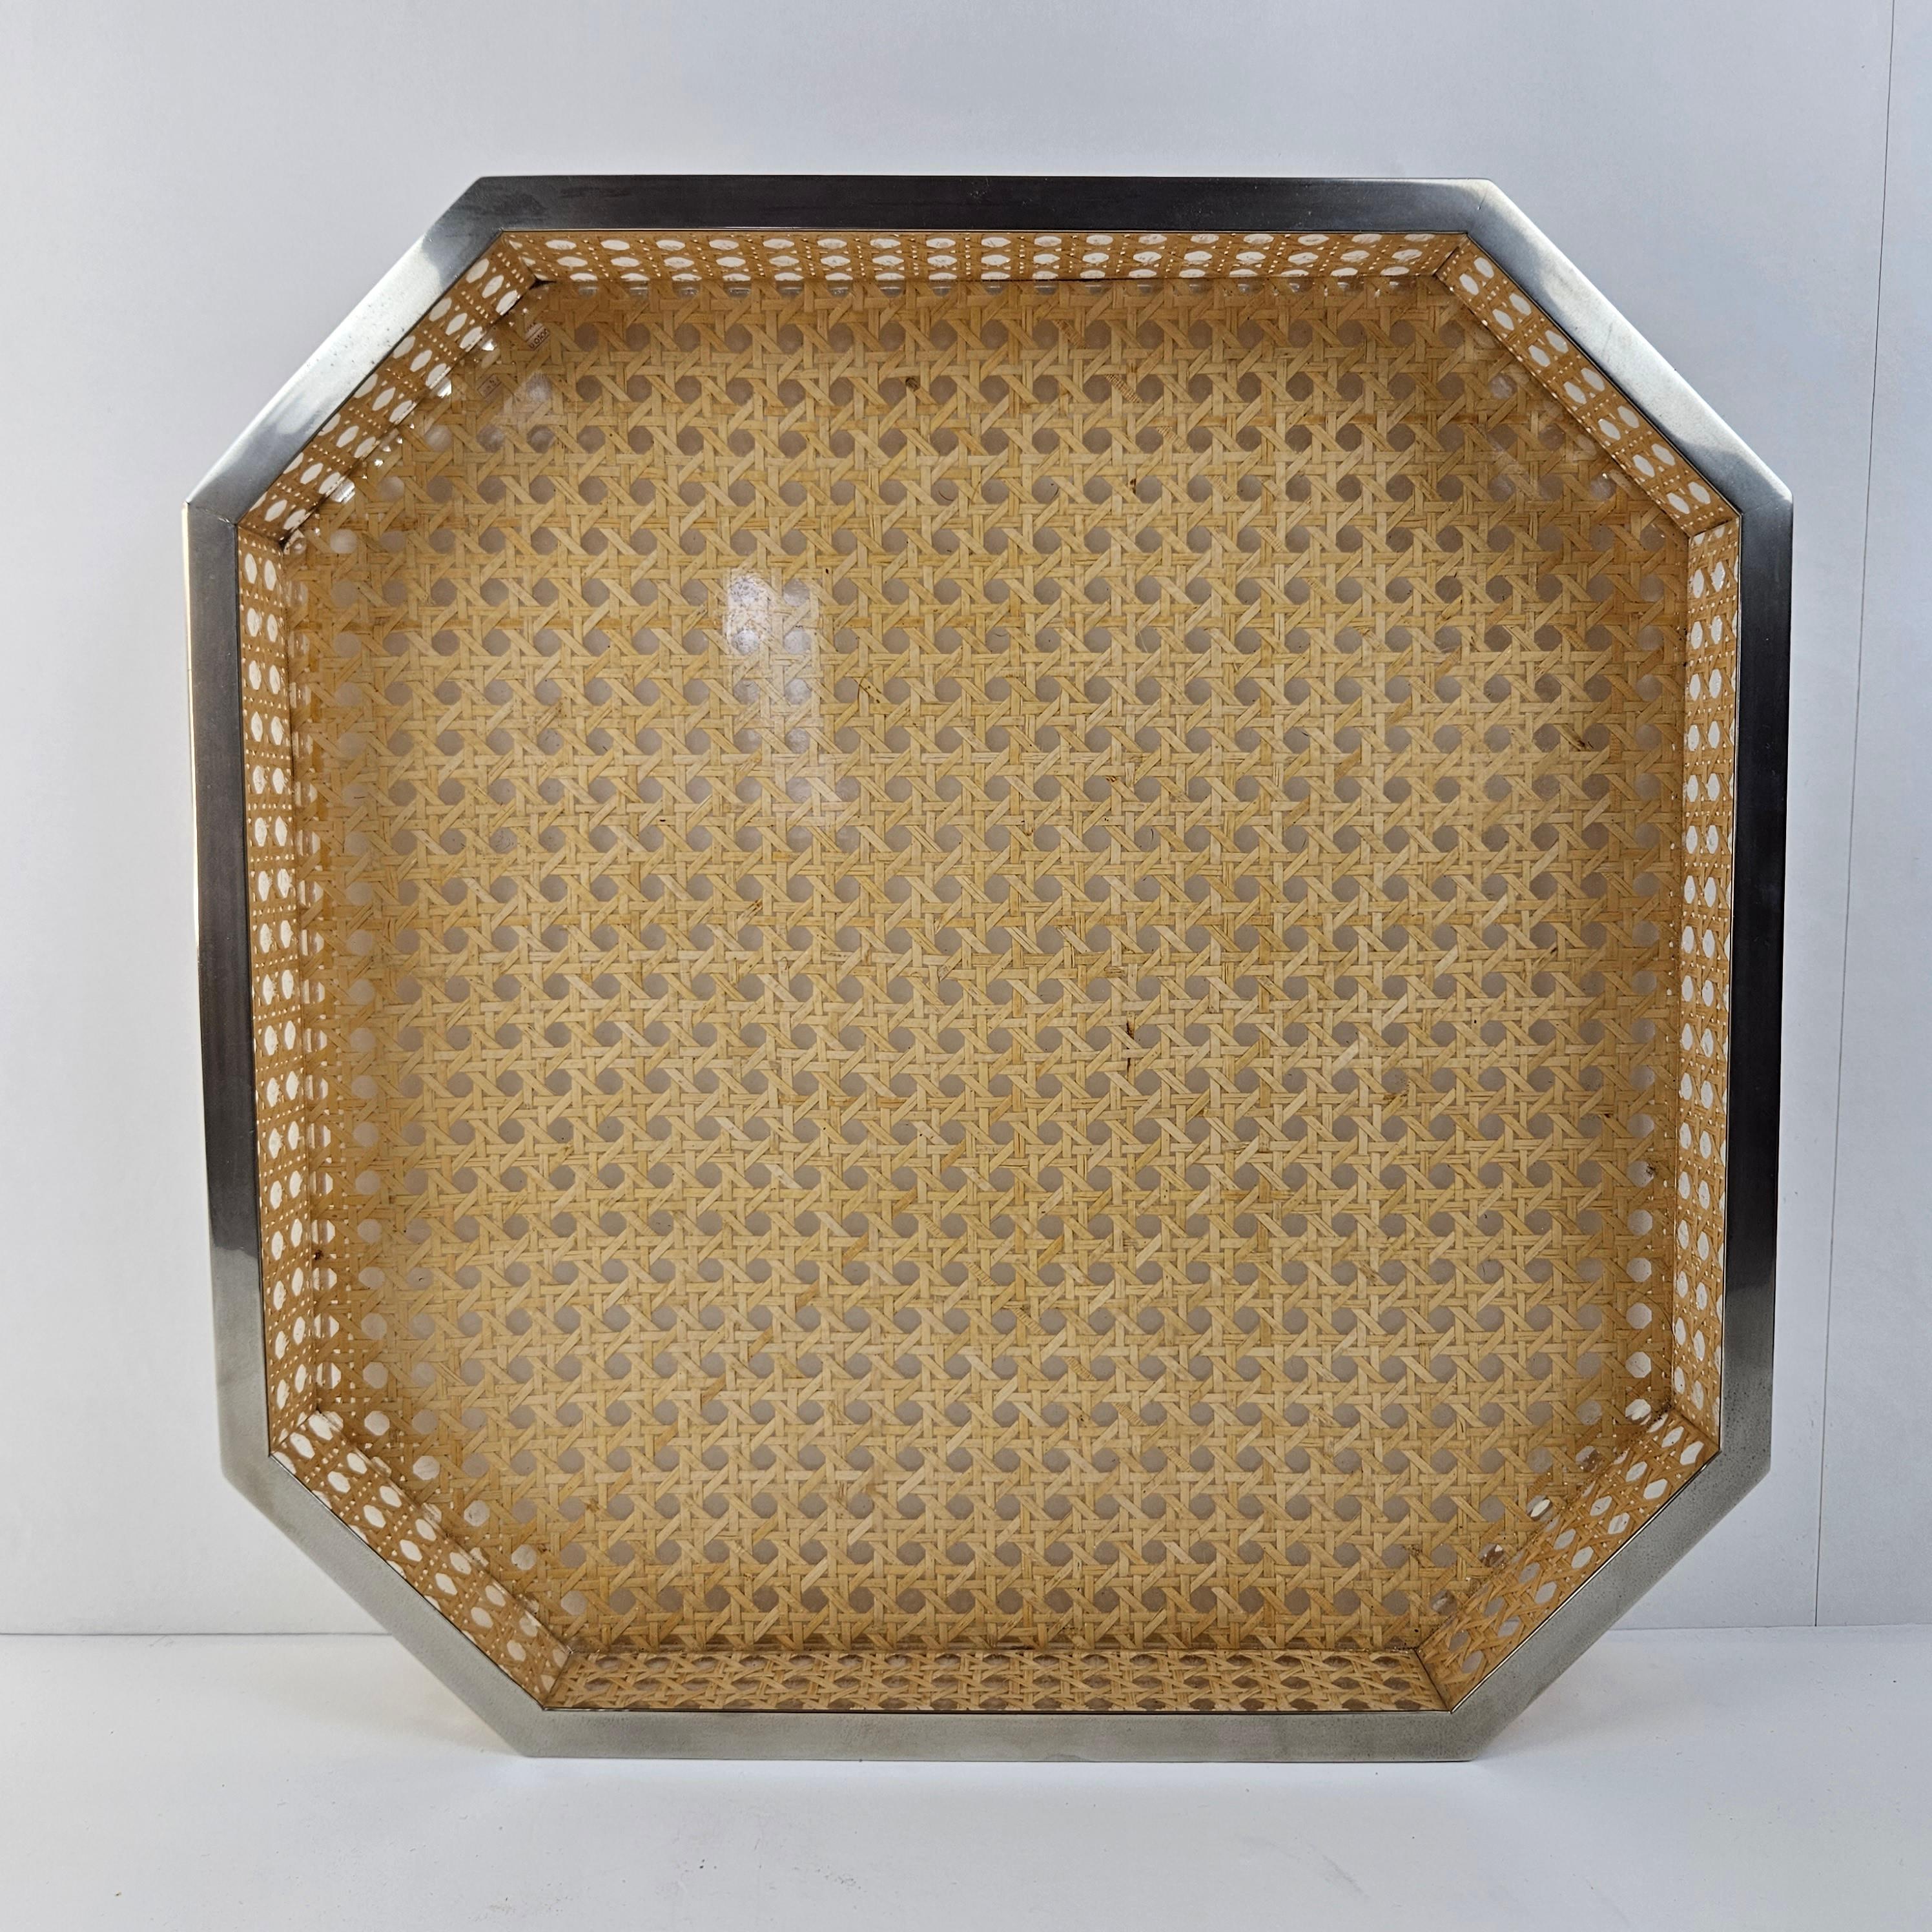 Mid-Century Modern Serving Tray in Lucite, Rattan and 24k Gold, Italy 1970s For Sale